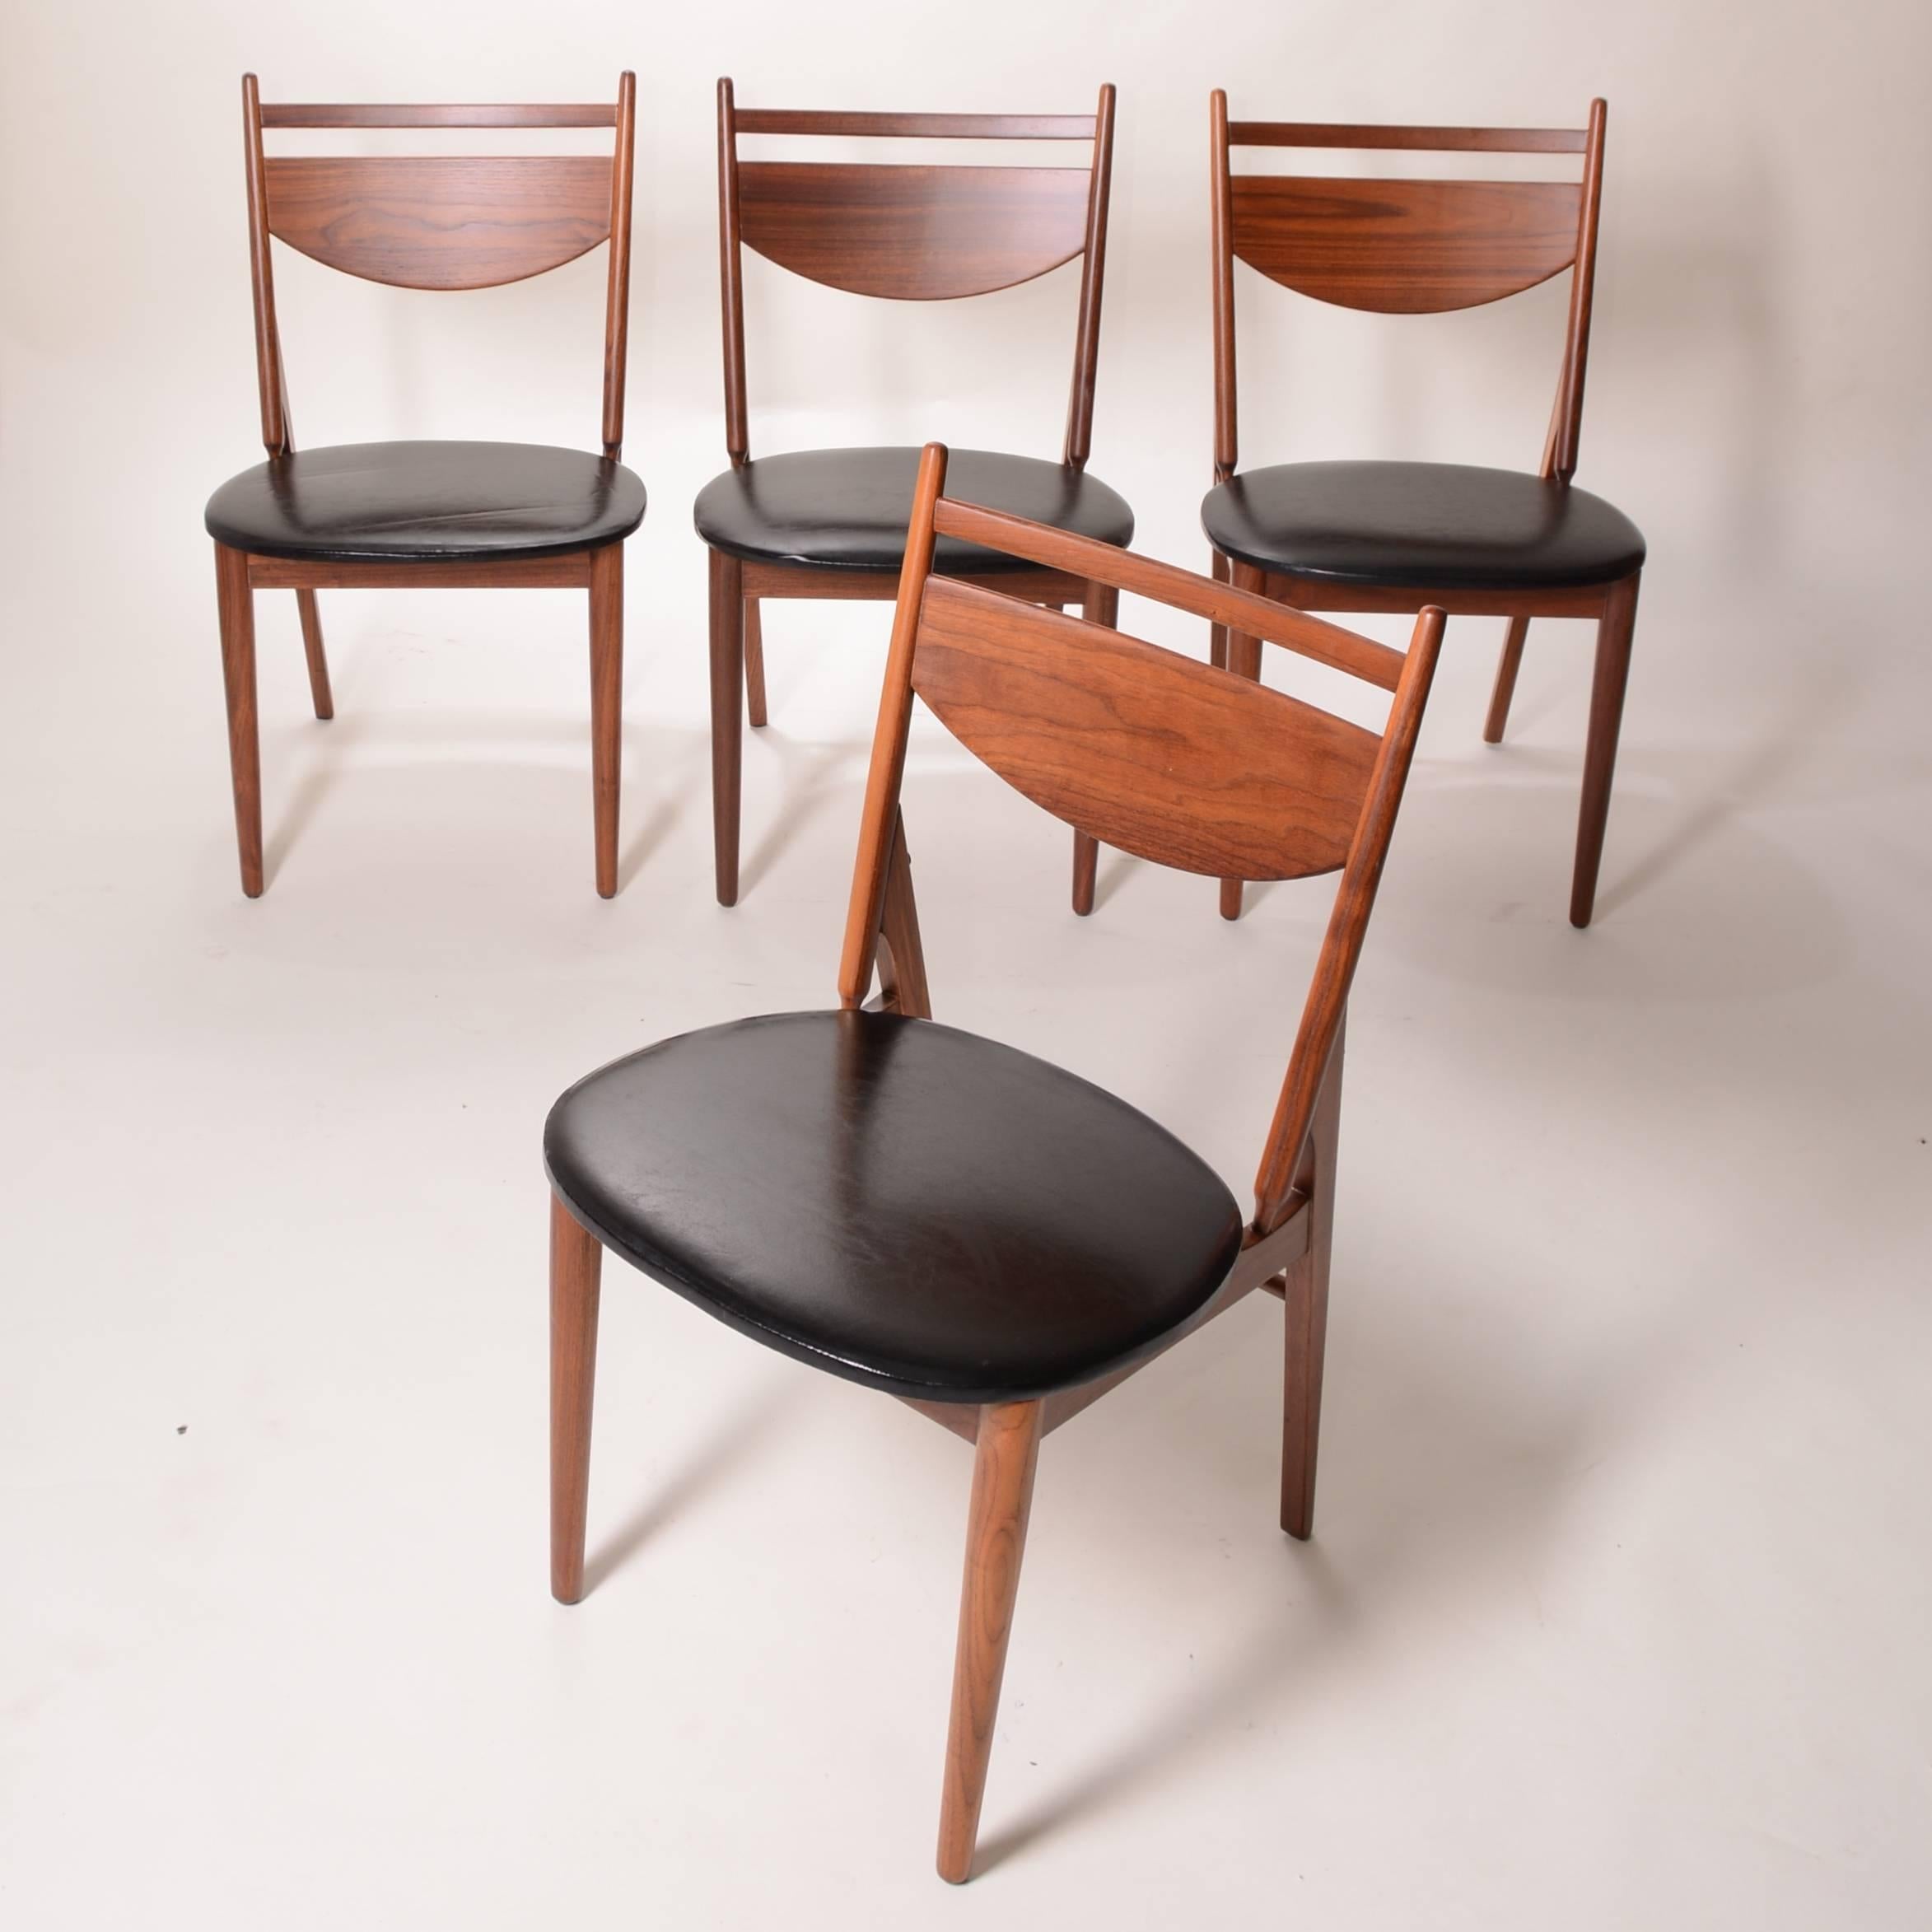 This is a restored set of four walnut dining chairs by Greta Grossman for Glenn of California. Also shown and sold separately is an expanding round dining table by Grossman.
This item is located at our Downtown Los Angeles showroom. Please come see